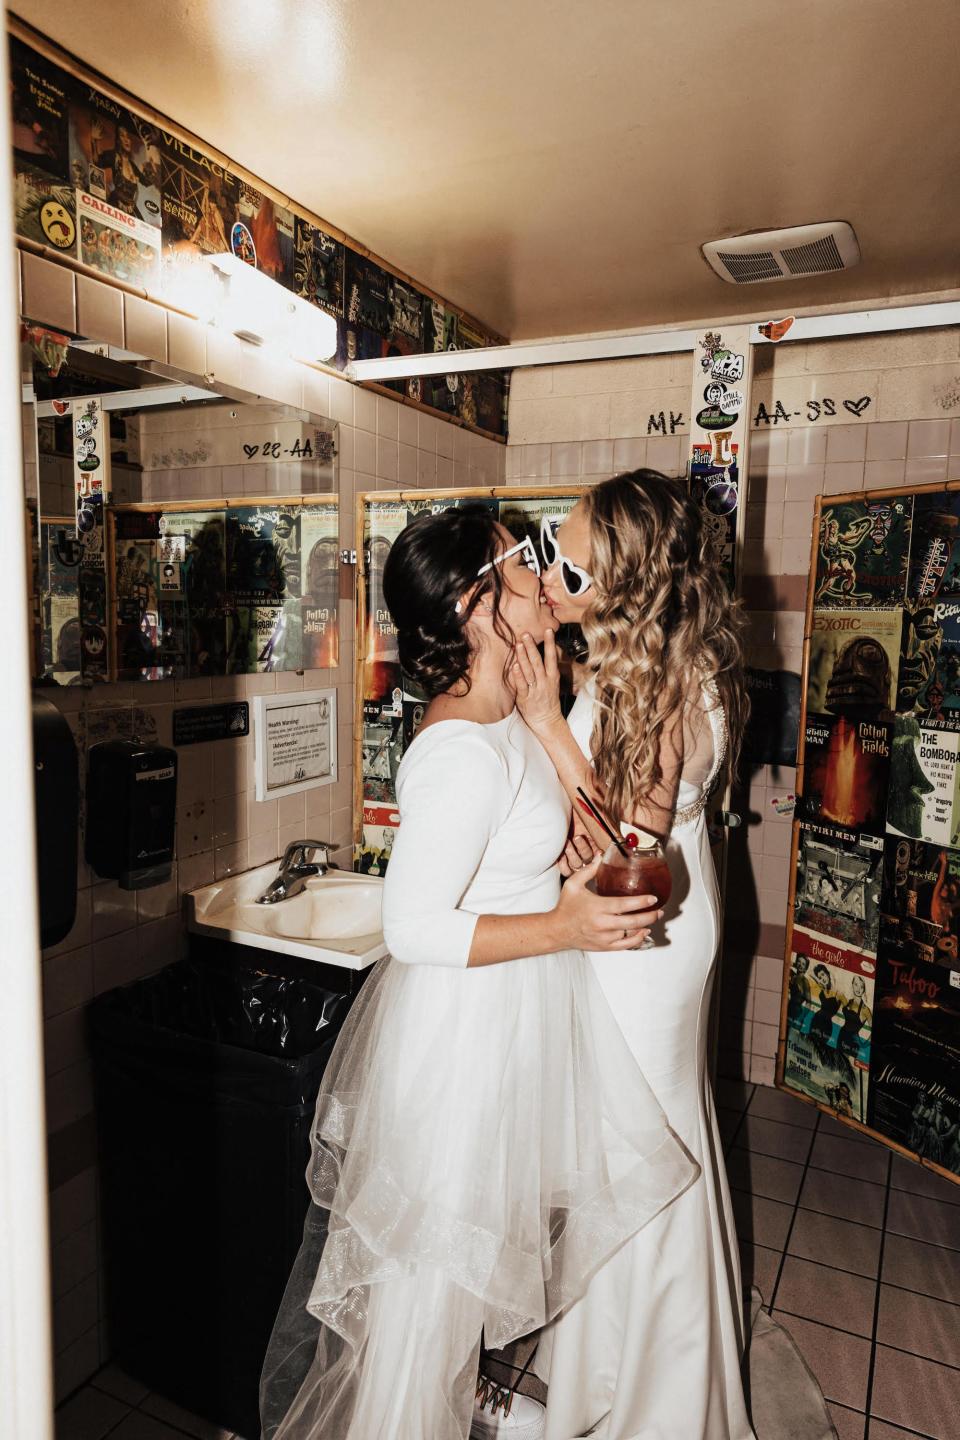 Two brides kiss in a bathroom wearing sunglasses and wedding dresses.